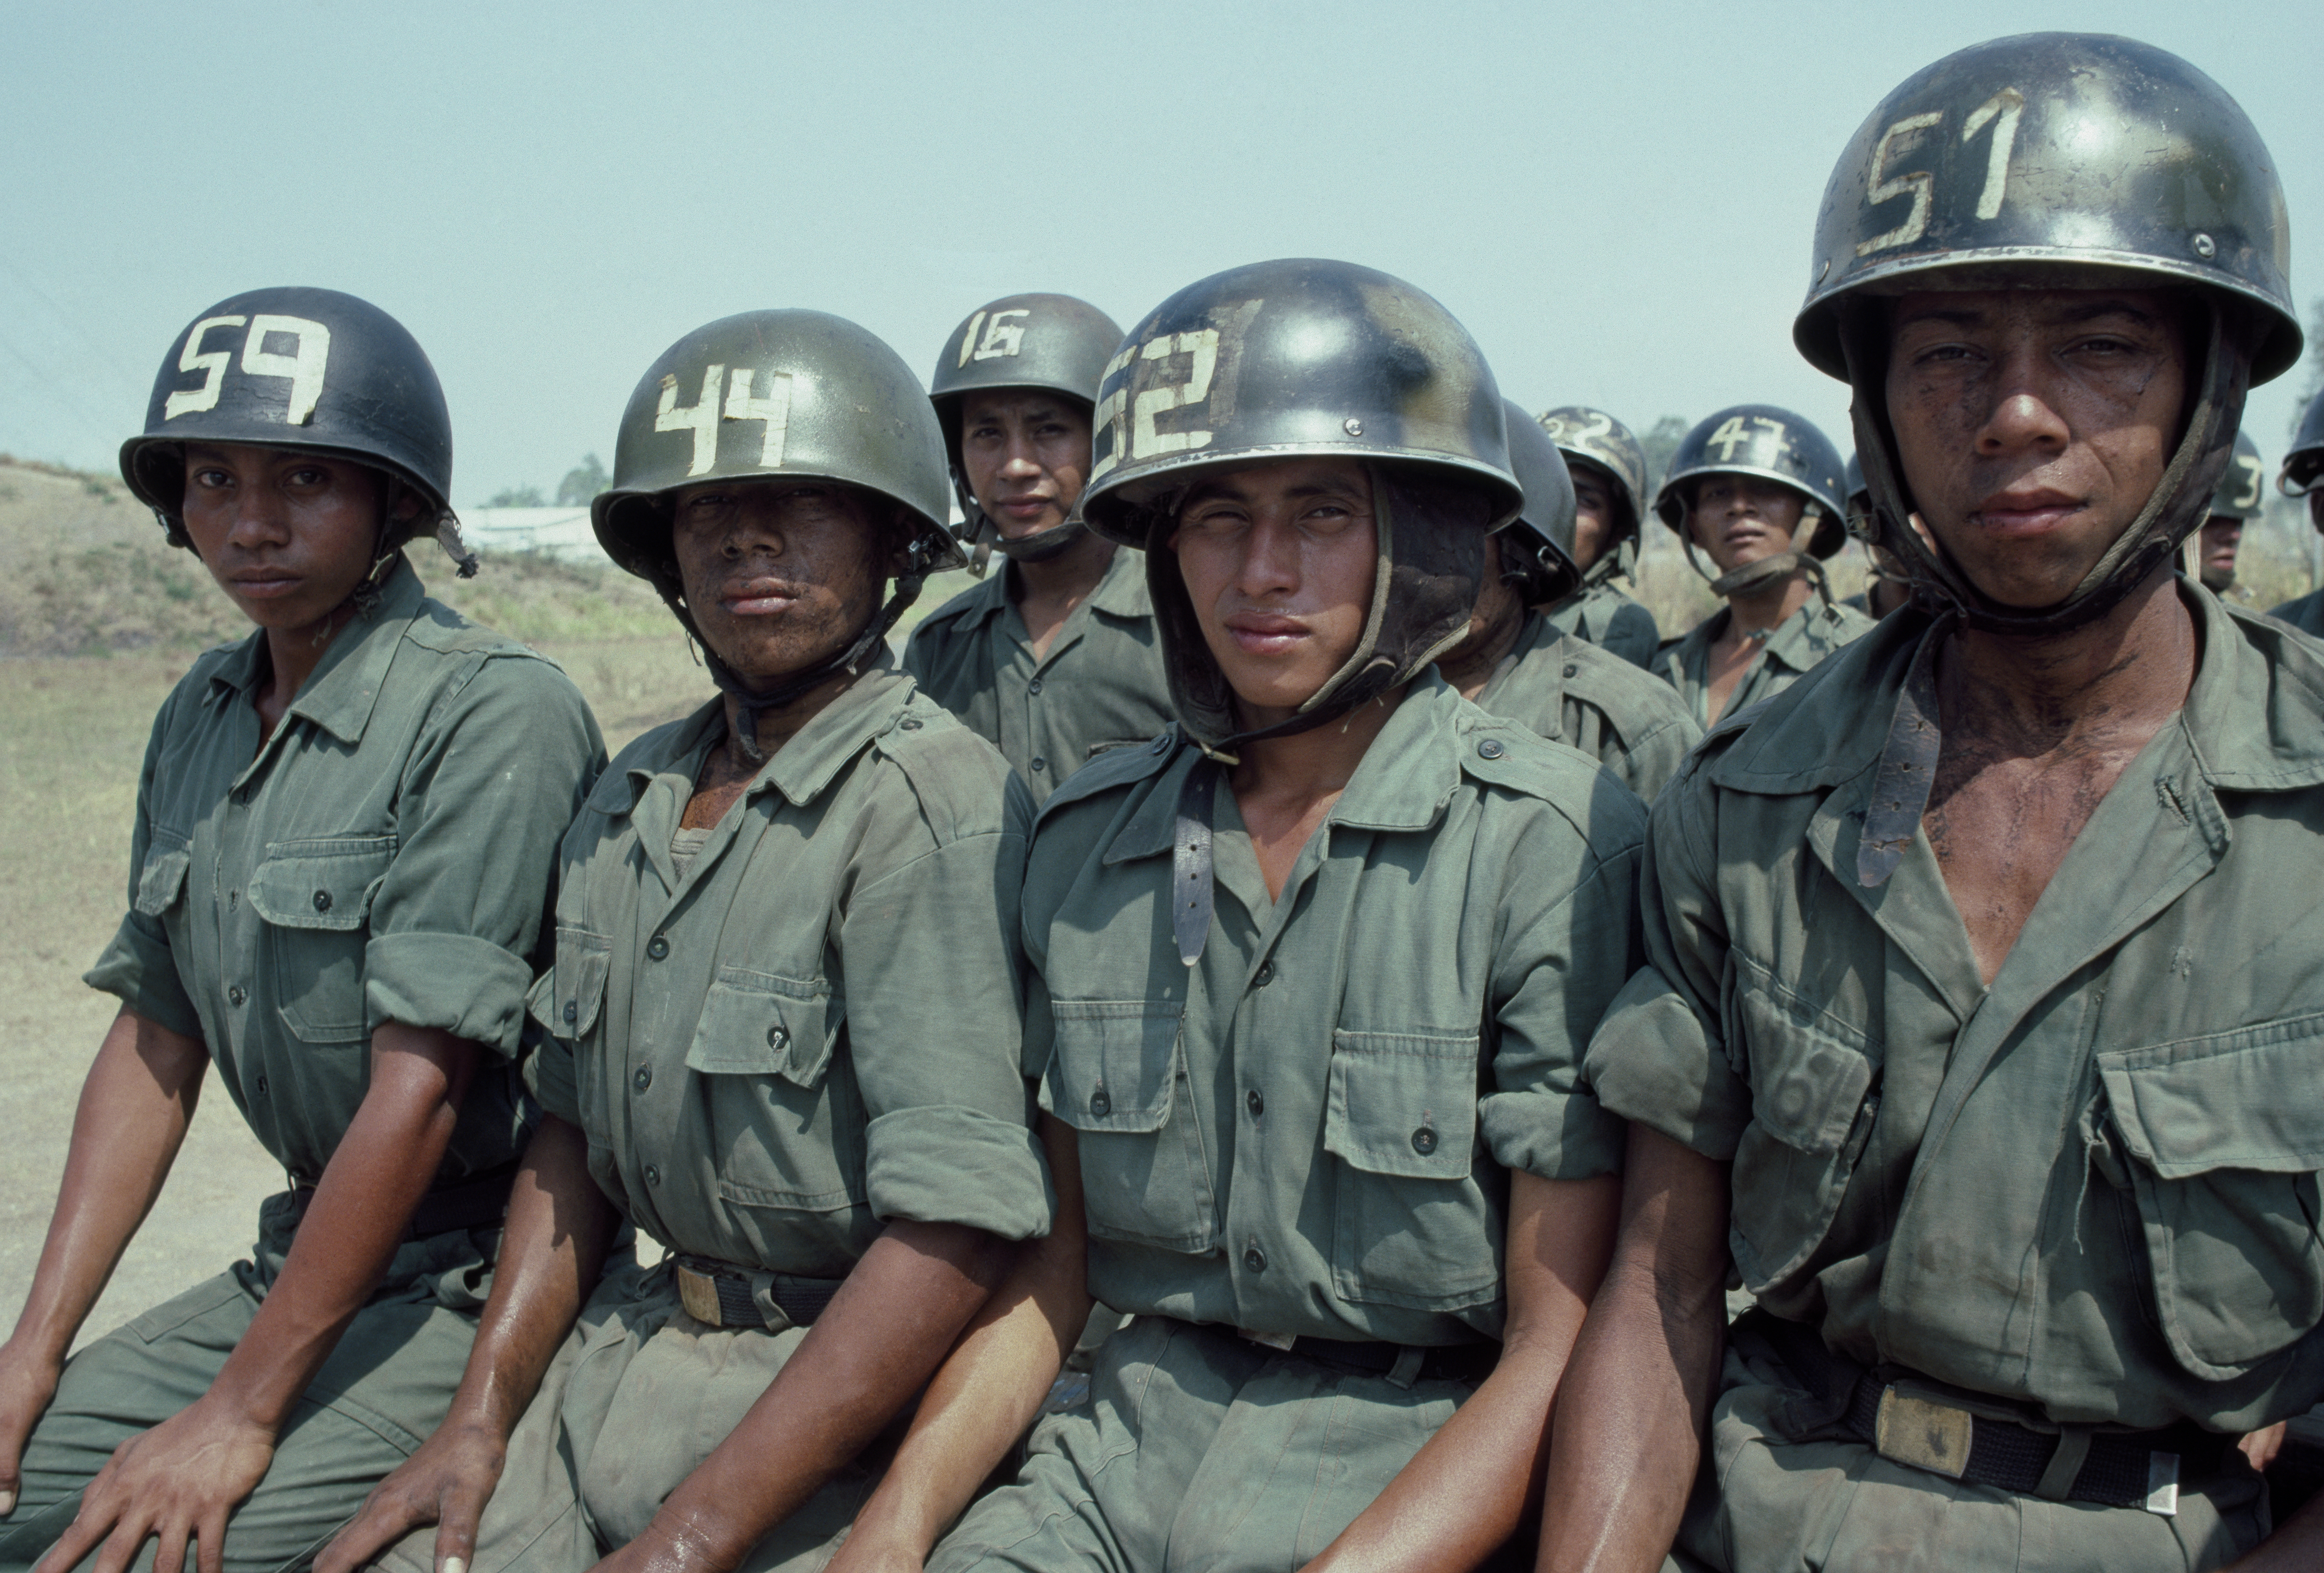 Four women dressed in Army green and helmets sit side by side and make eye contact with the camera.